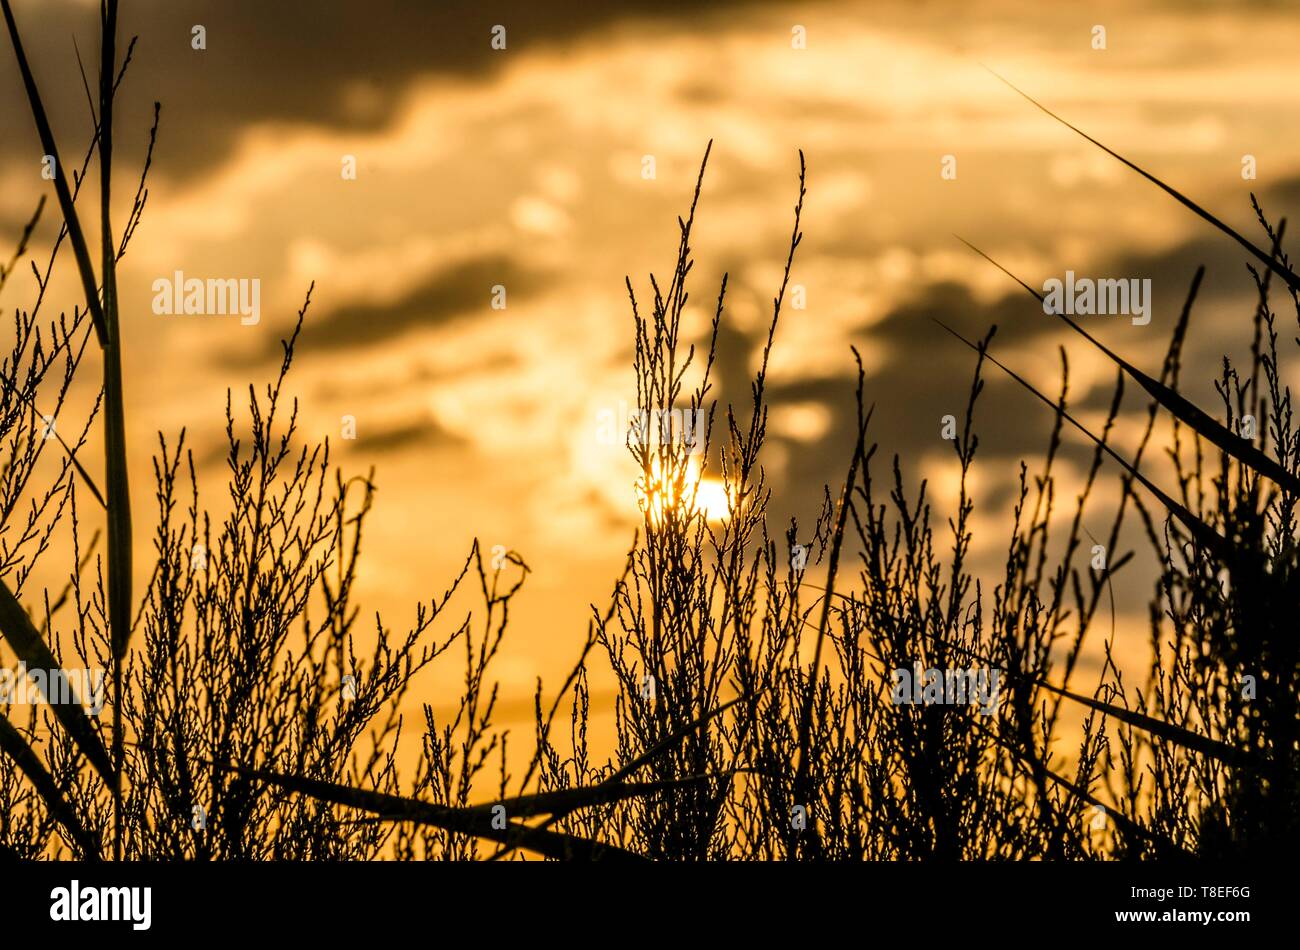 Background of sunset landscape with silhouettes of plants in the foreground Stock Photo